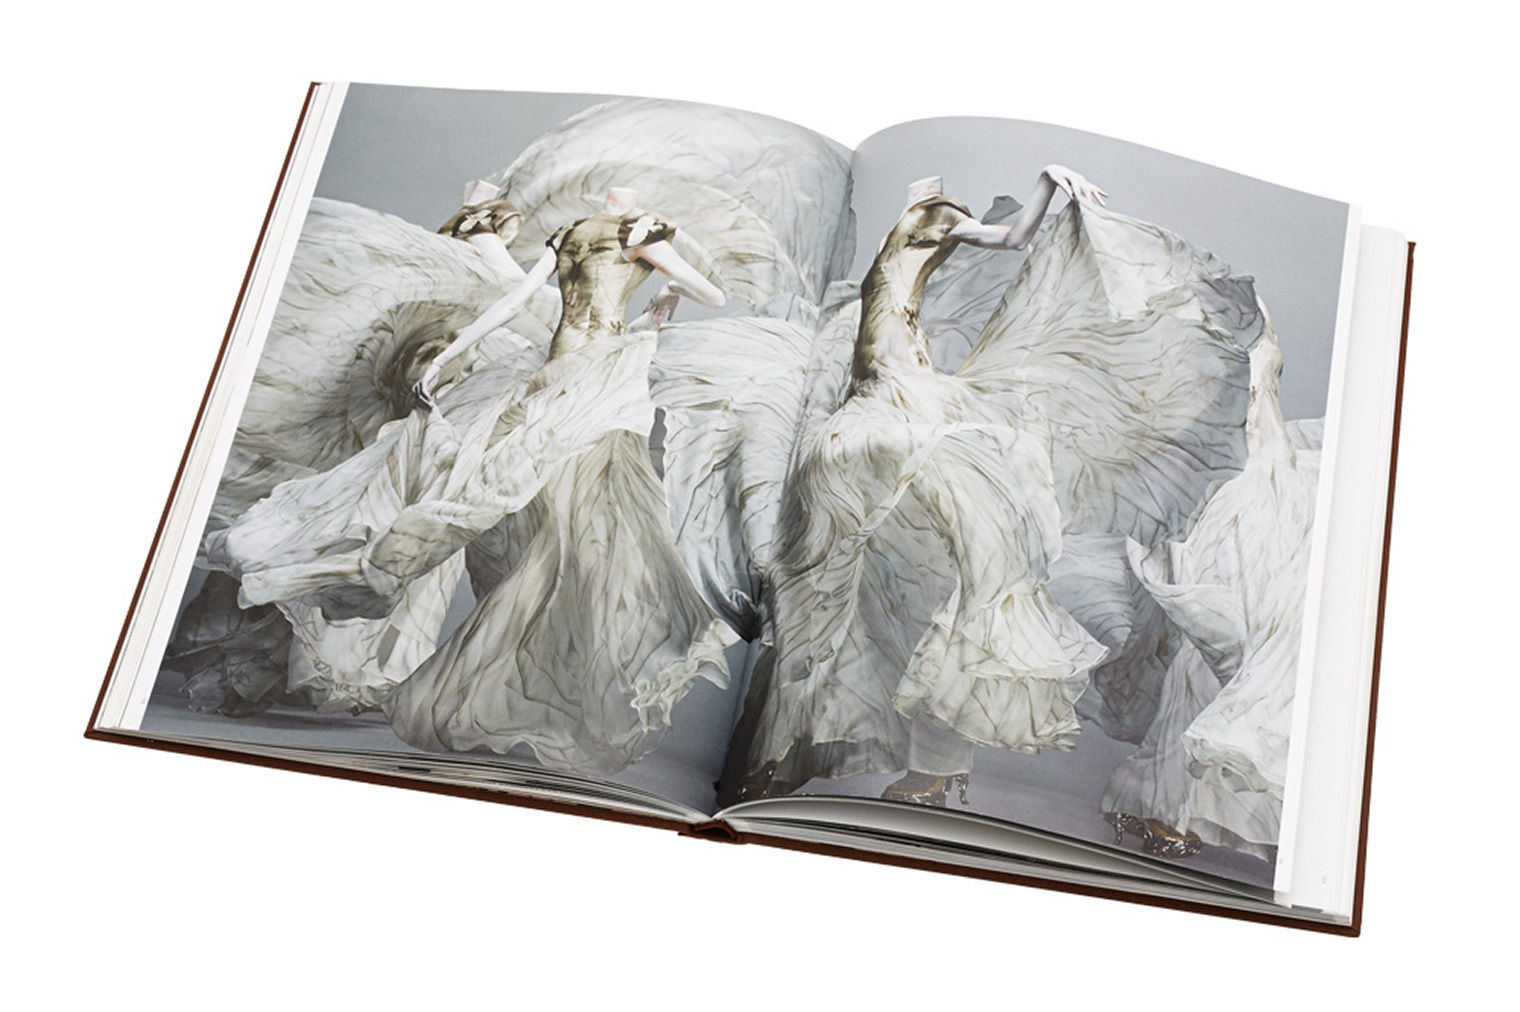 A picture of a book depicting fashion designed by Alexander McQueen